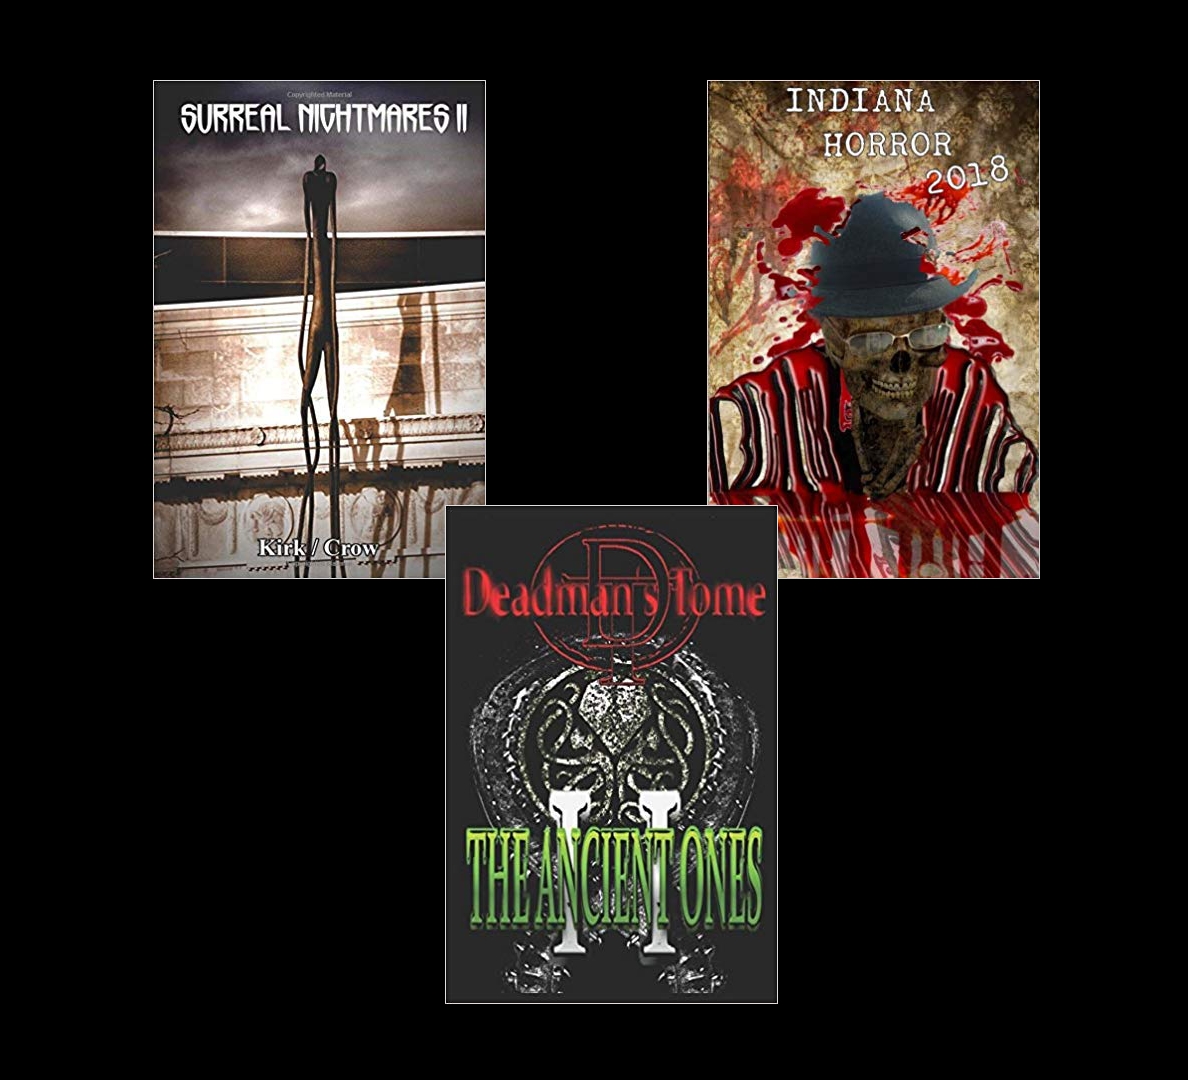 Covers for "Surreal Nightmares II", "Ancient Ones II", and "Indiana Horror Review 2018"